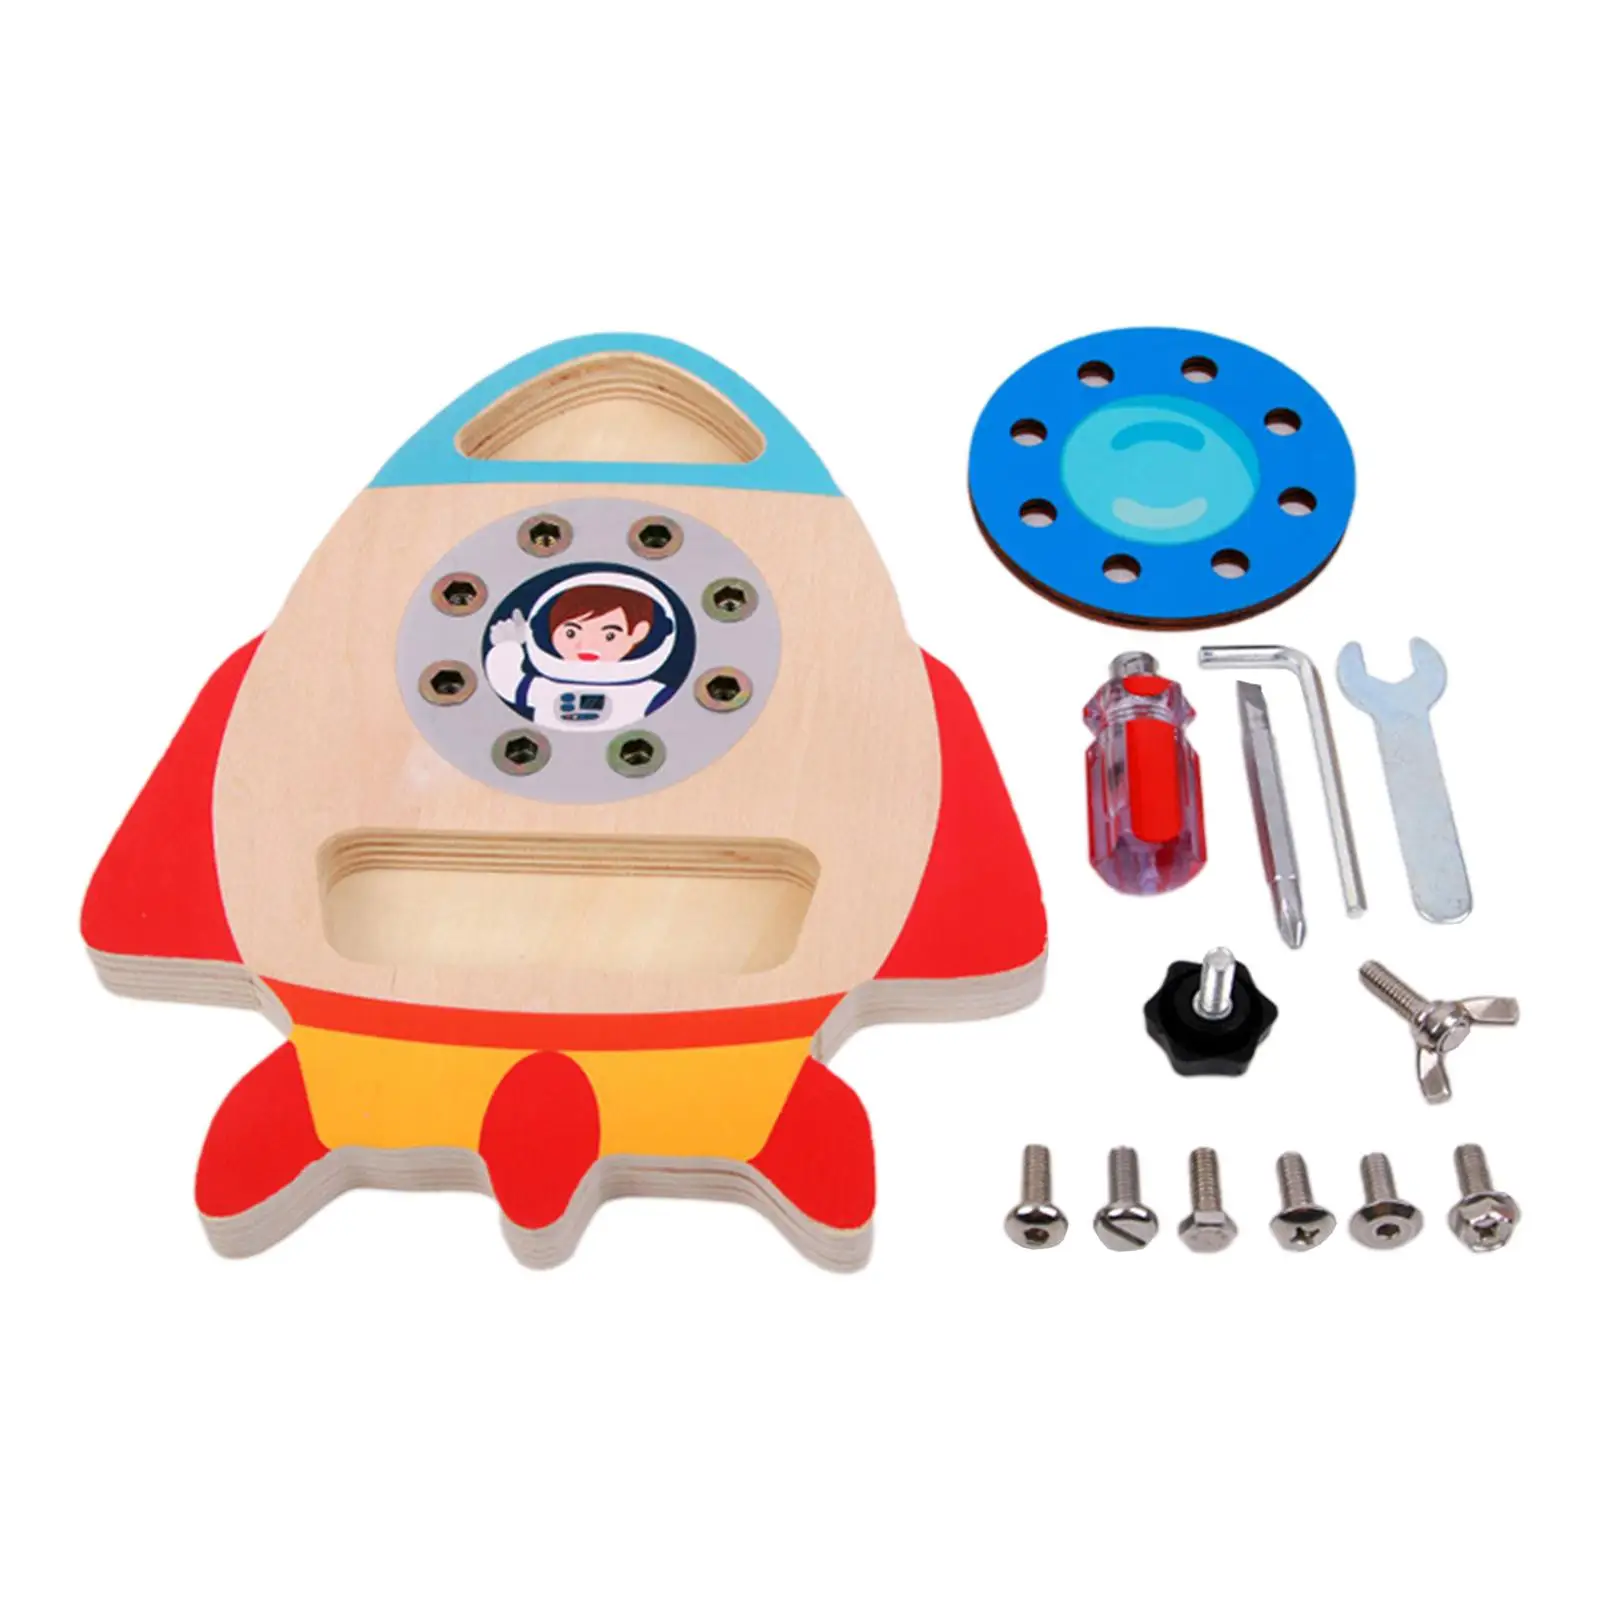 Toy Screwdriver Board Set Screw Building Set Wooden Early Education Toy Screwdriver Activities Tools for Girls Boy